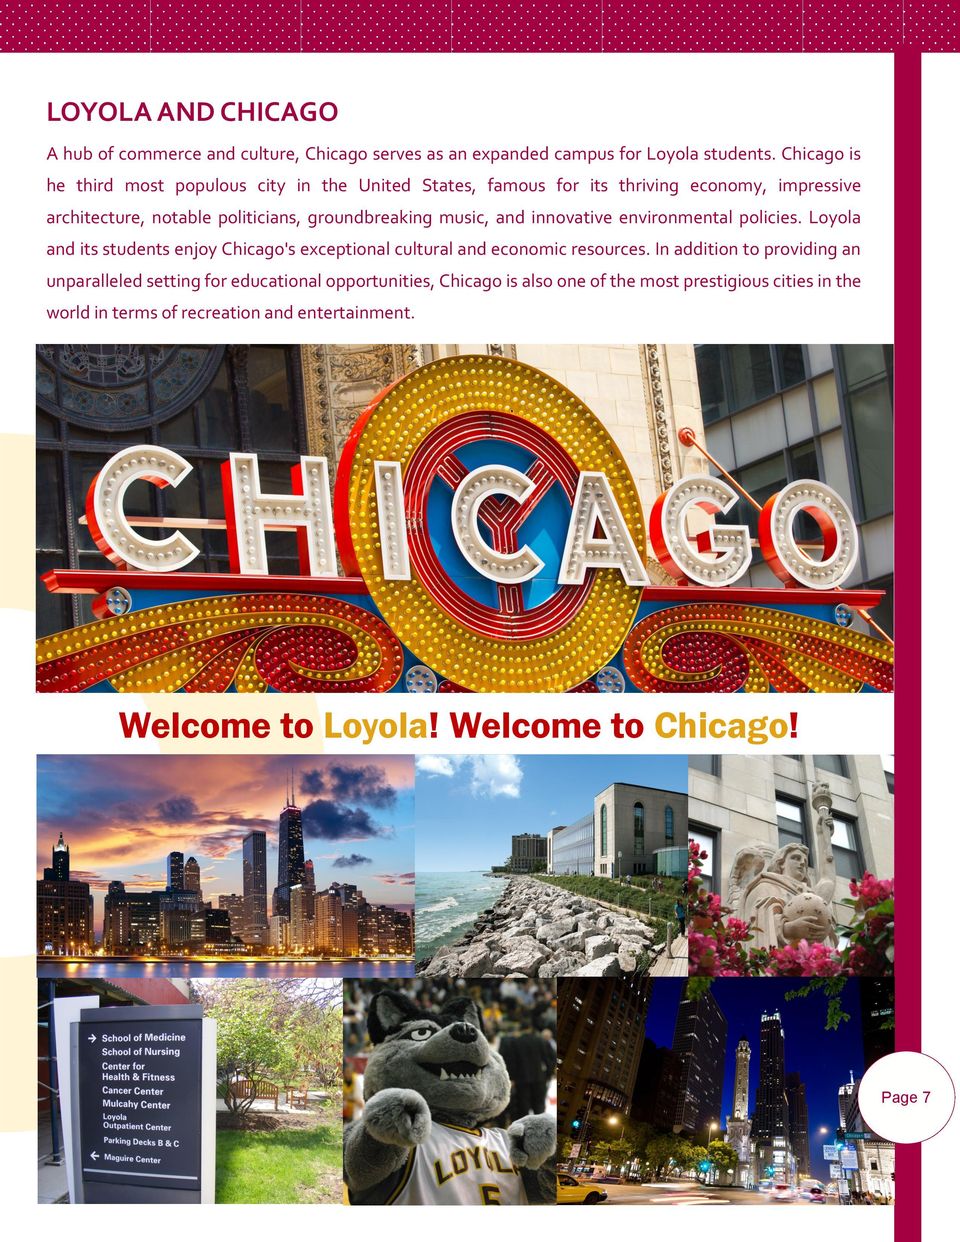 music, and innovative environmental policies. Loyola and its students enjoy Chicago's exceptional cultural and economic resources.